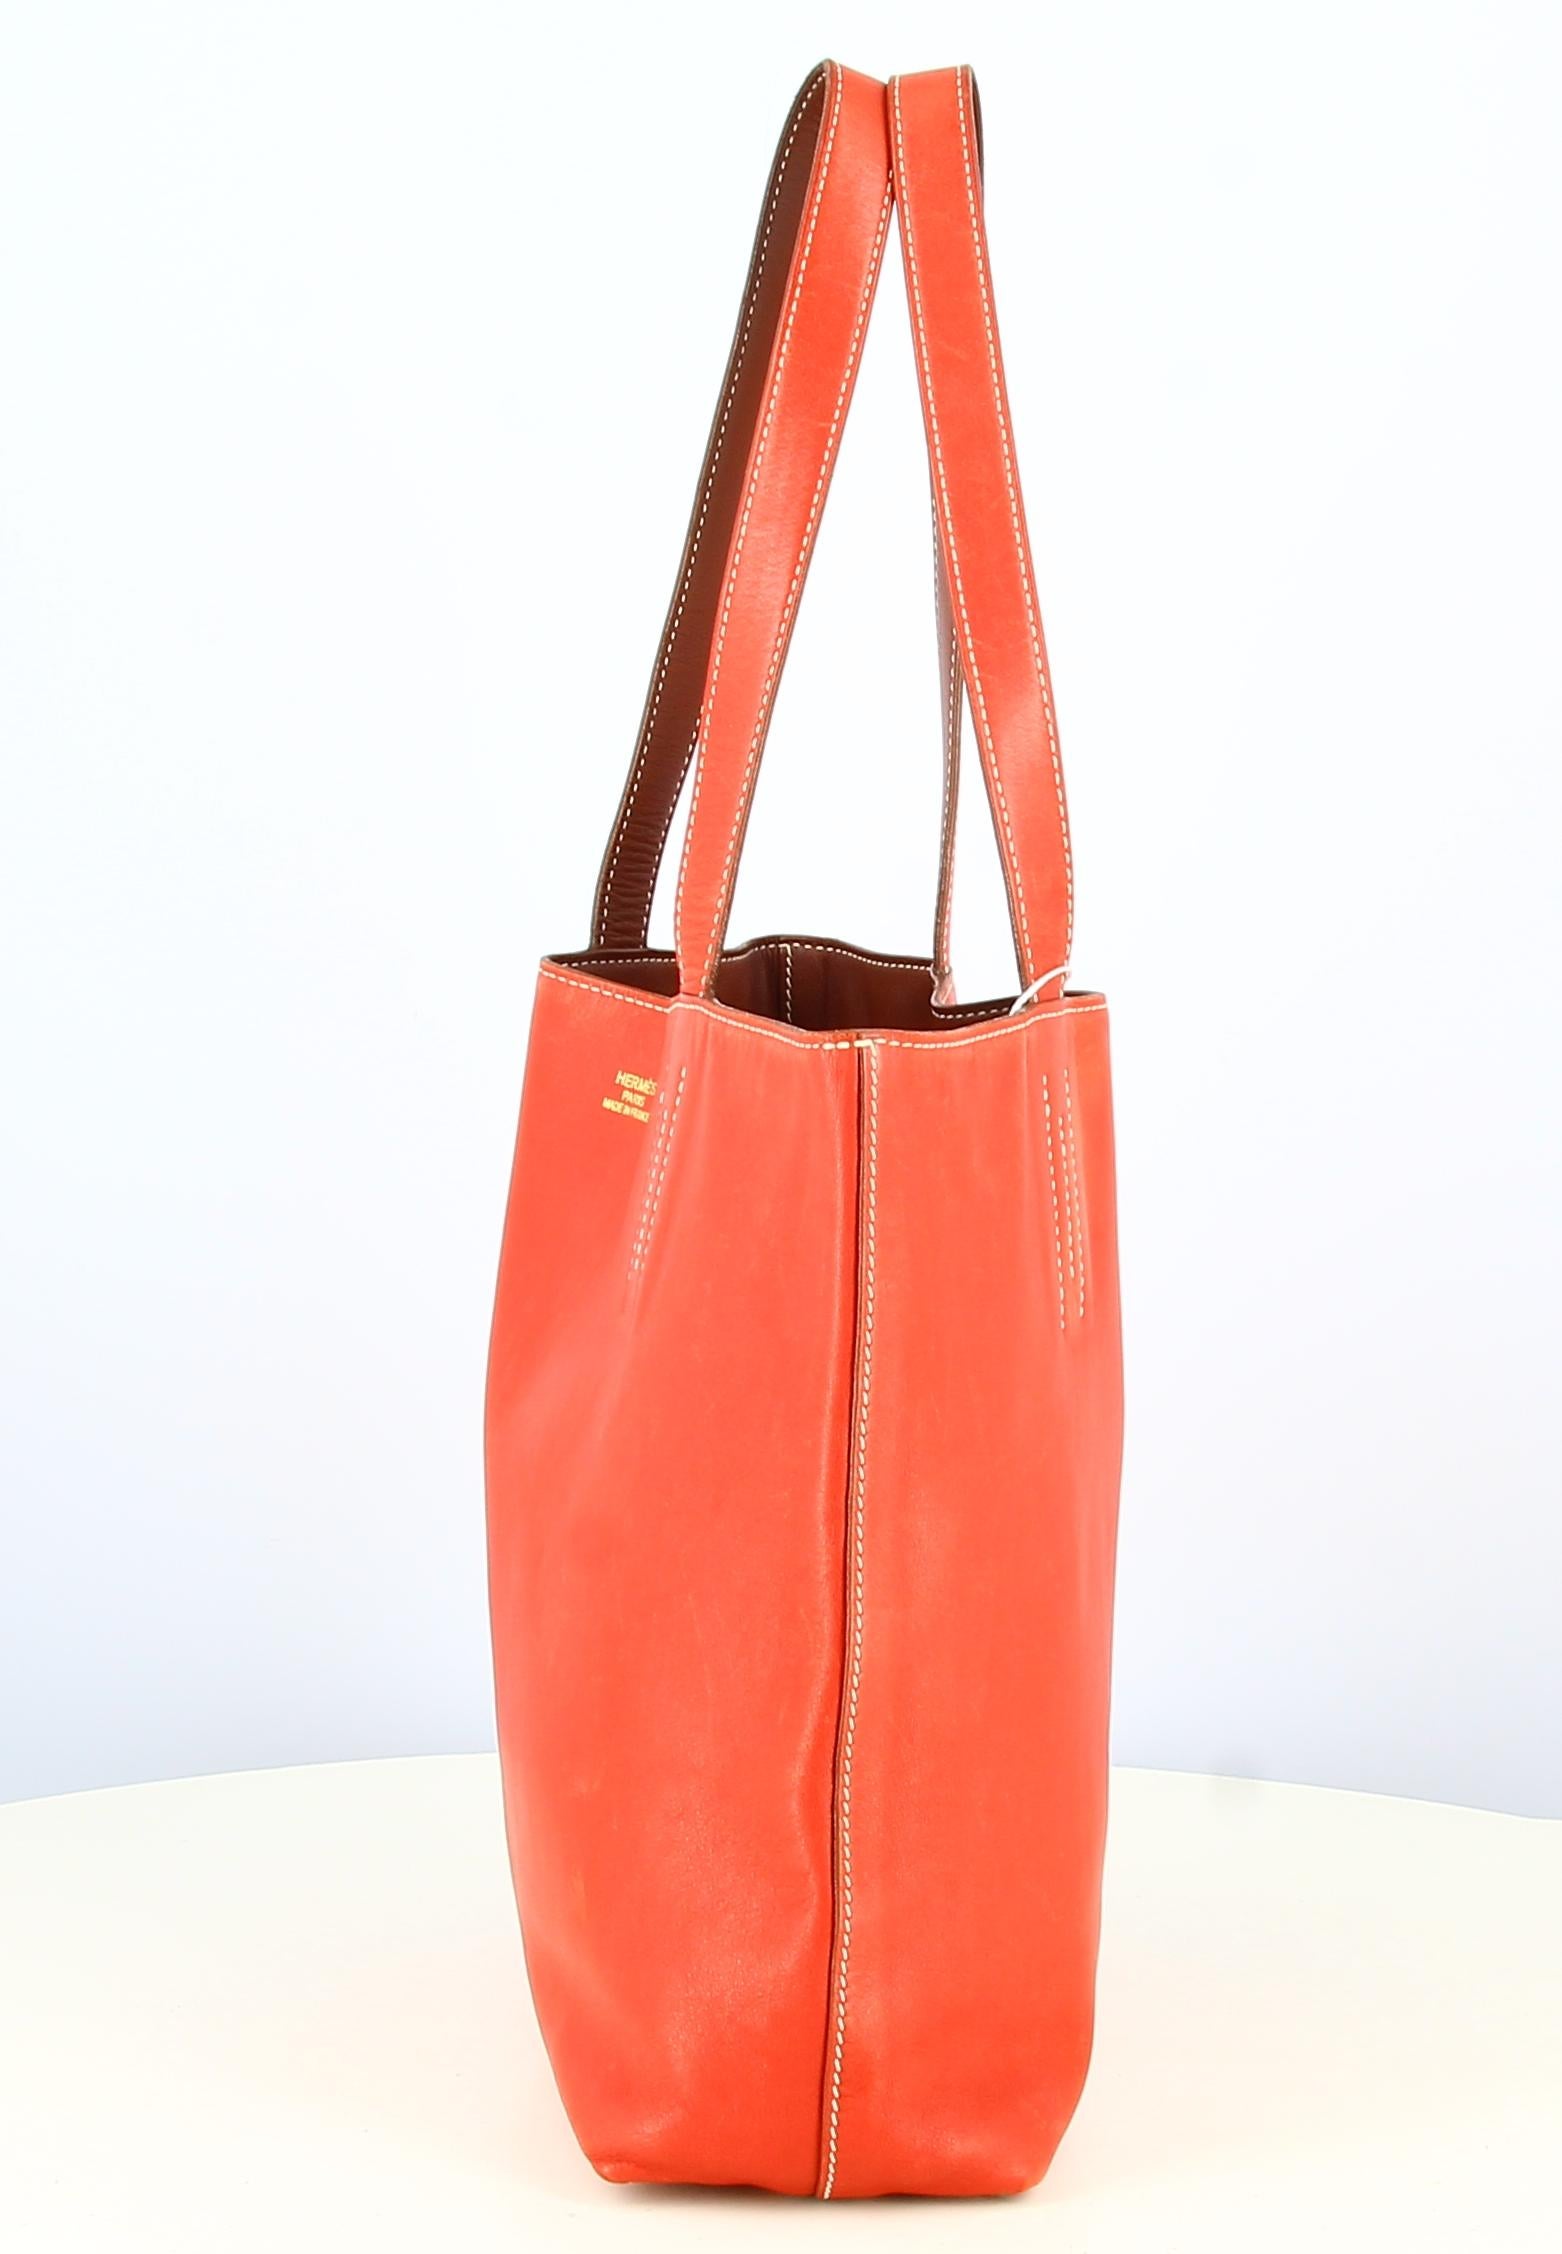 2003 Hermès Red Leather Handbag   Double sens In Good Condition For Sale In PARIS, FR